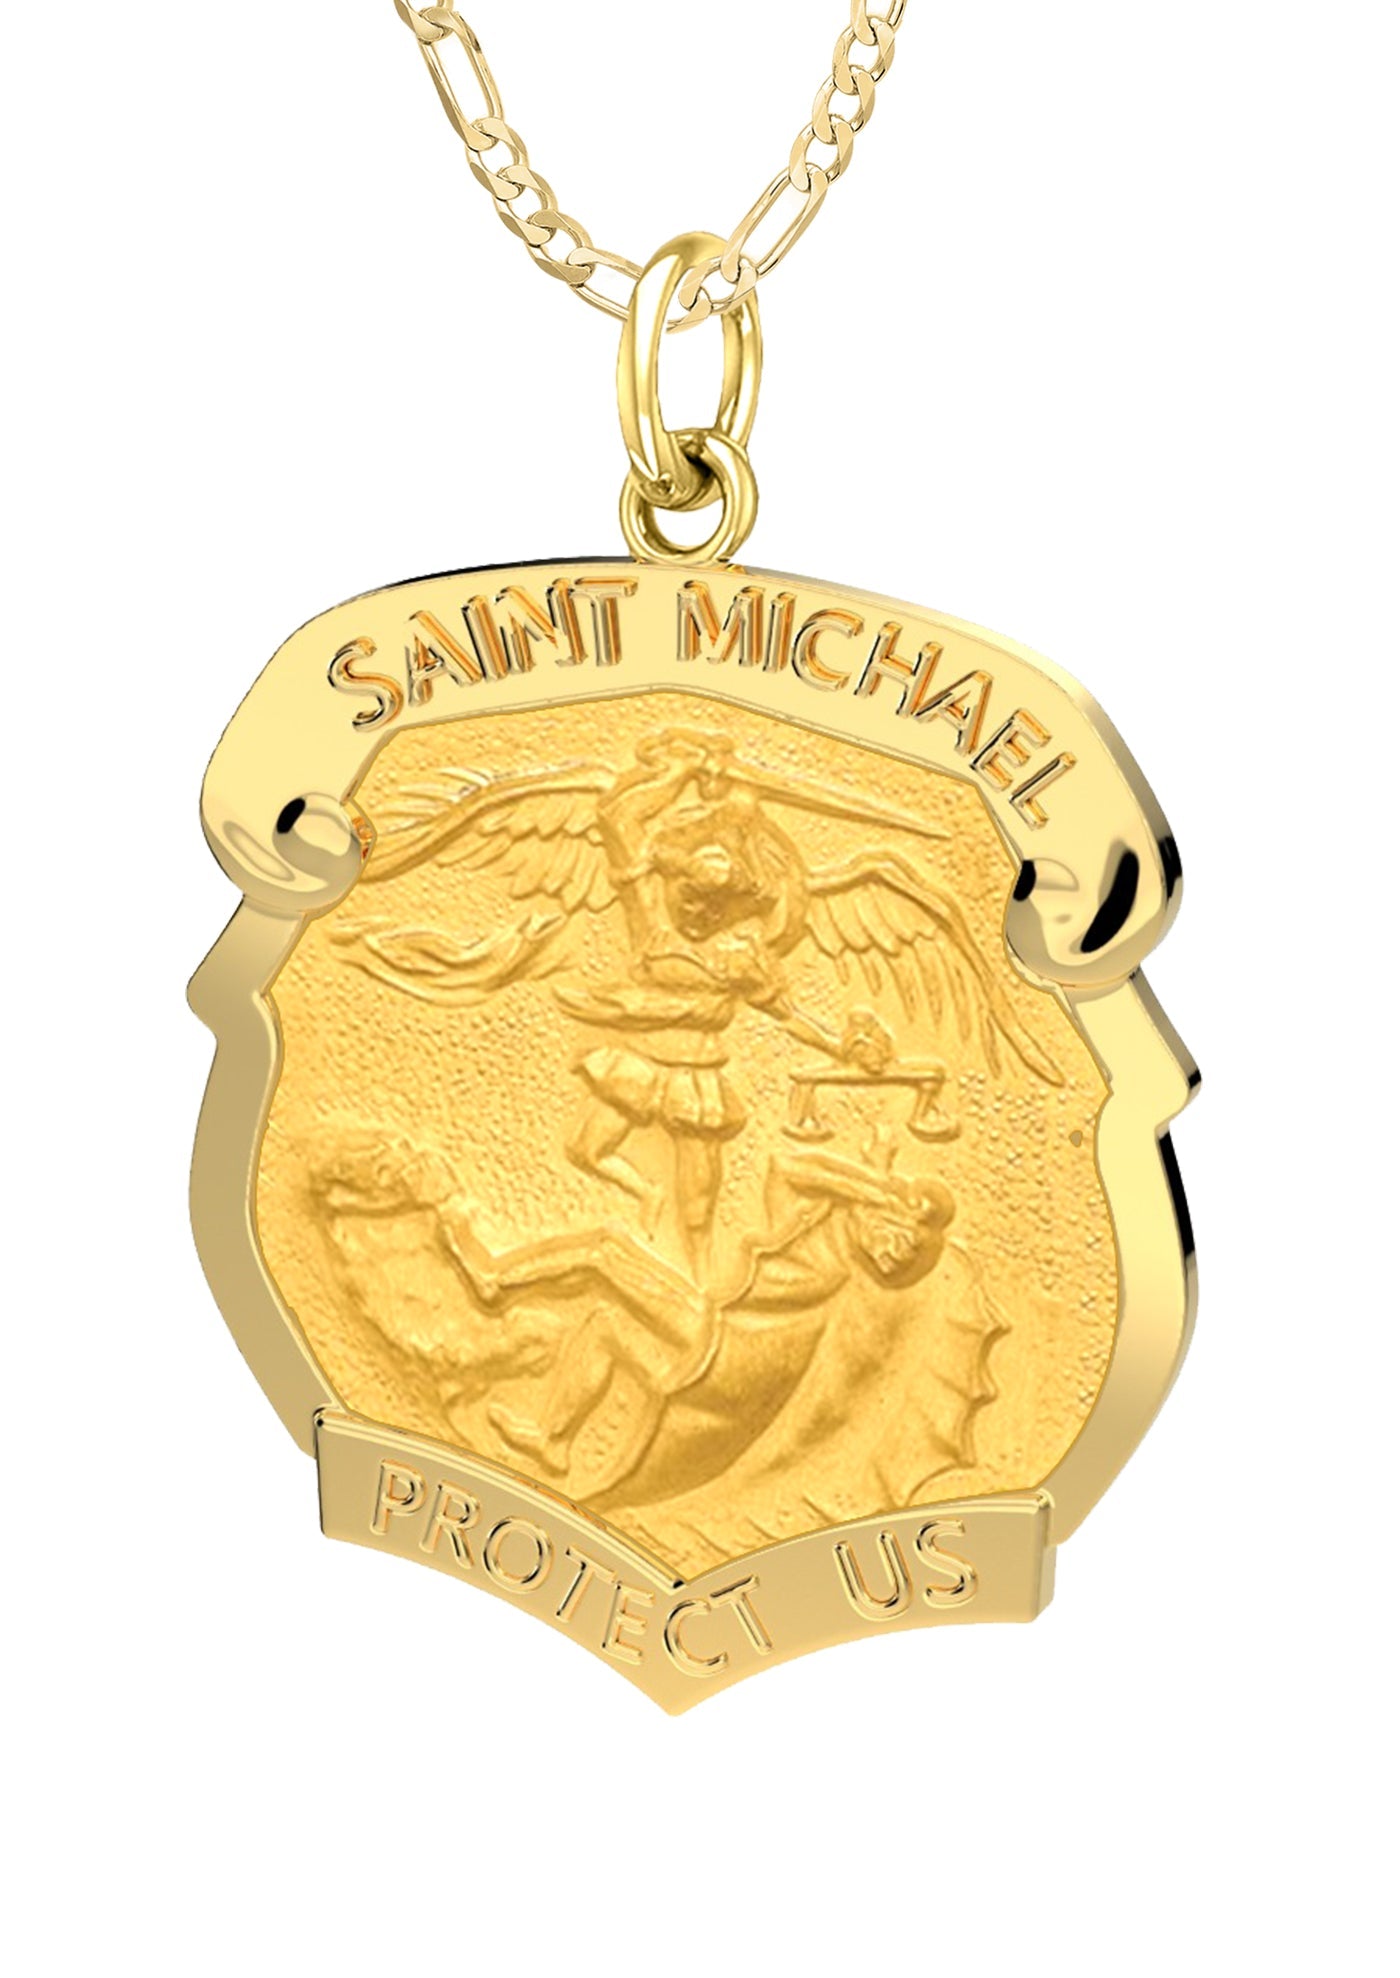 Ladies 14k Yellow Gold Badge St Saint Michael Solid Medal Pendant Necklace,  28mm - 16in 2.2mm Figaro Chain